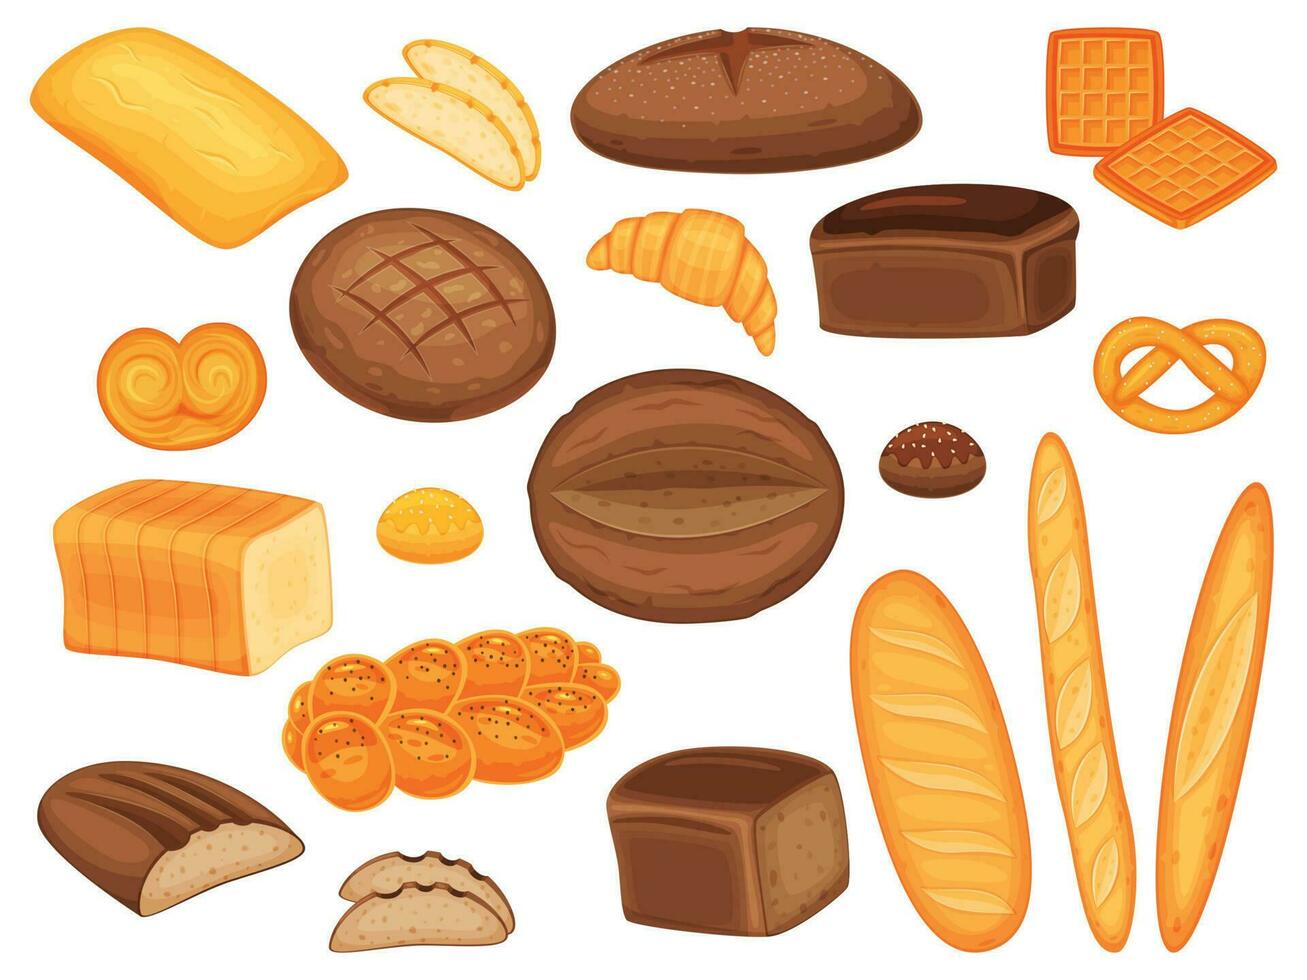 Cartoon bread, baguette, buns, pastry and bakery products. Fresh loaf of whole grain bread, croissant, pretzel, homemade pastries vector set